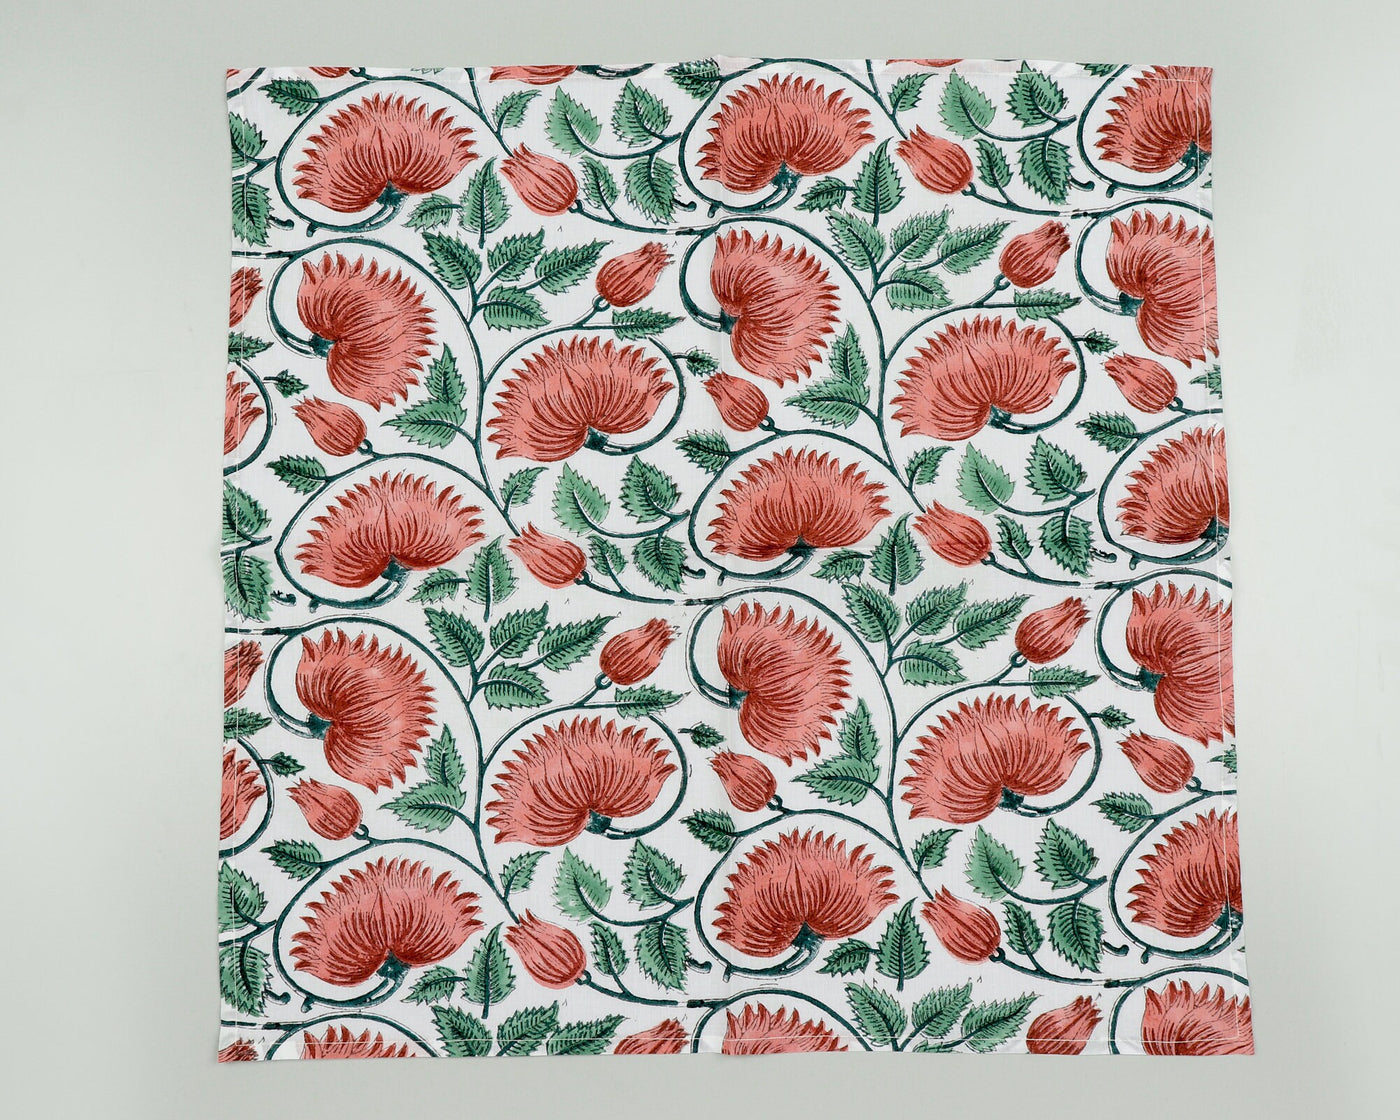 Light Coral and Light Russian Green Indian Floral Hand Block Printed Cotton Cloth Napkins, 18x18"- Cocktail Napkins, 20x20"- Dinner Napkins